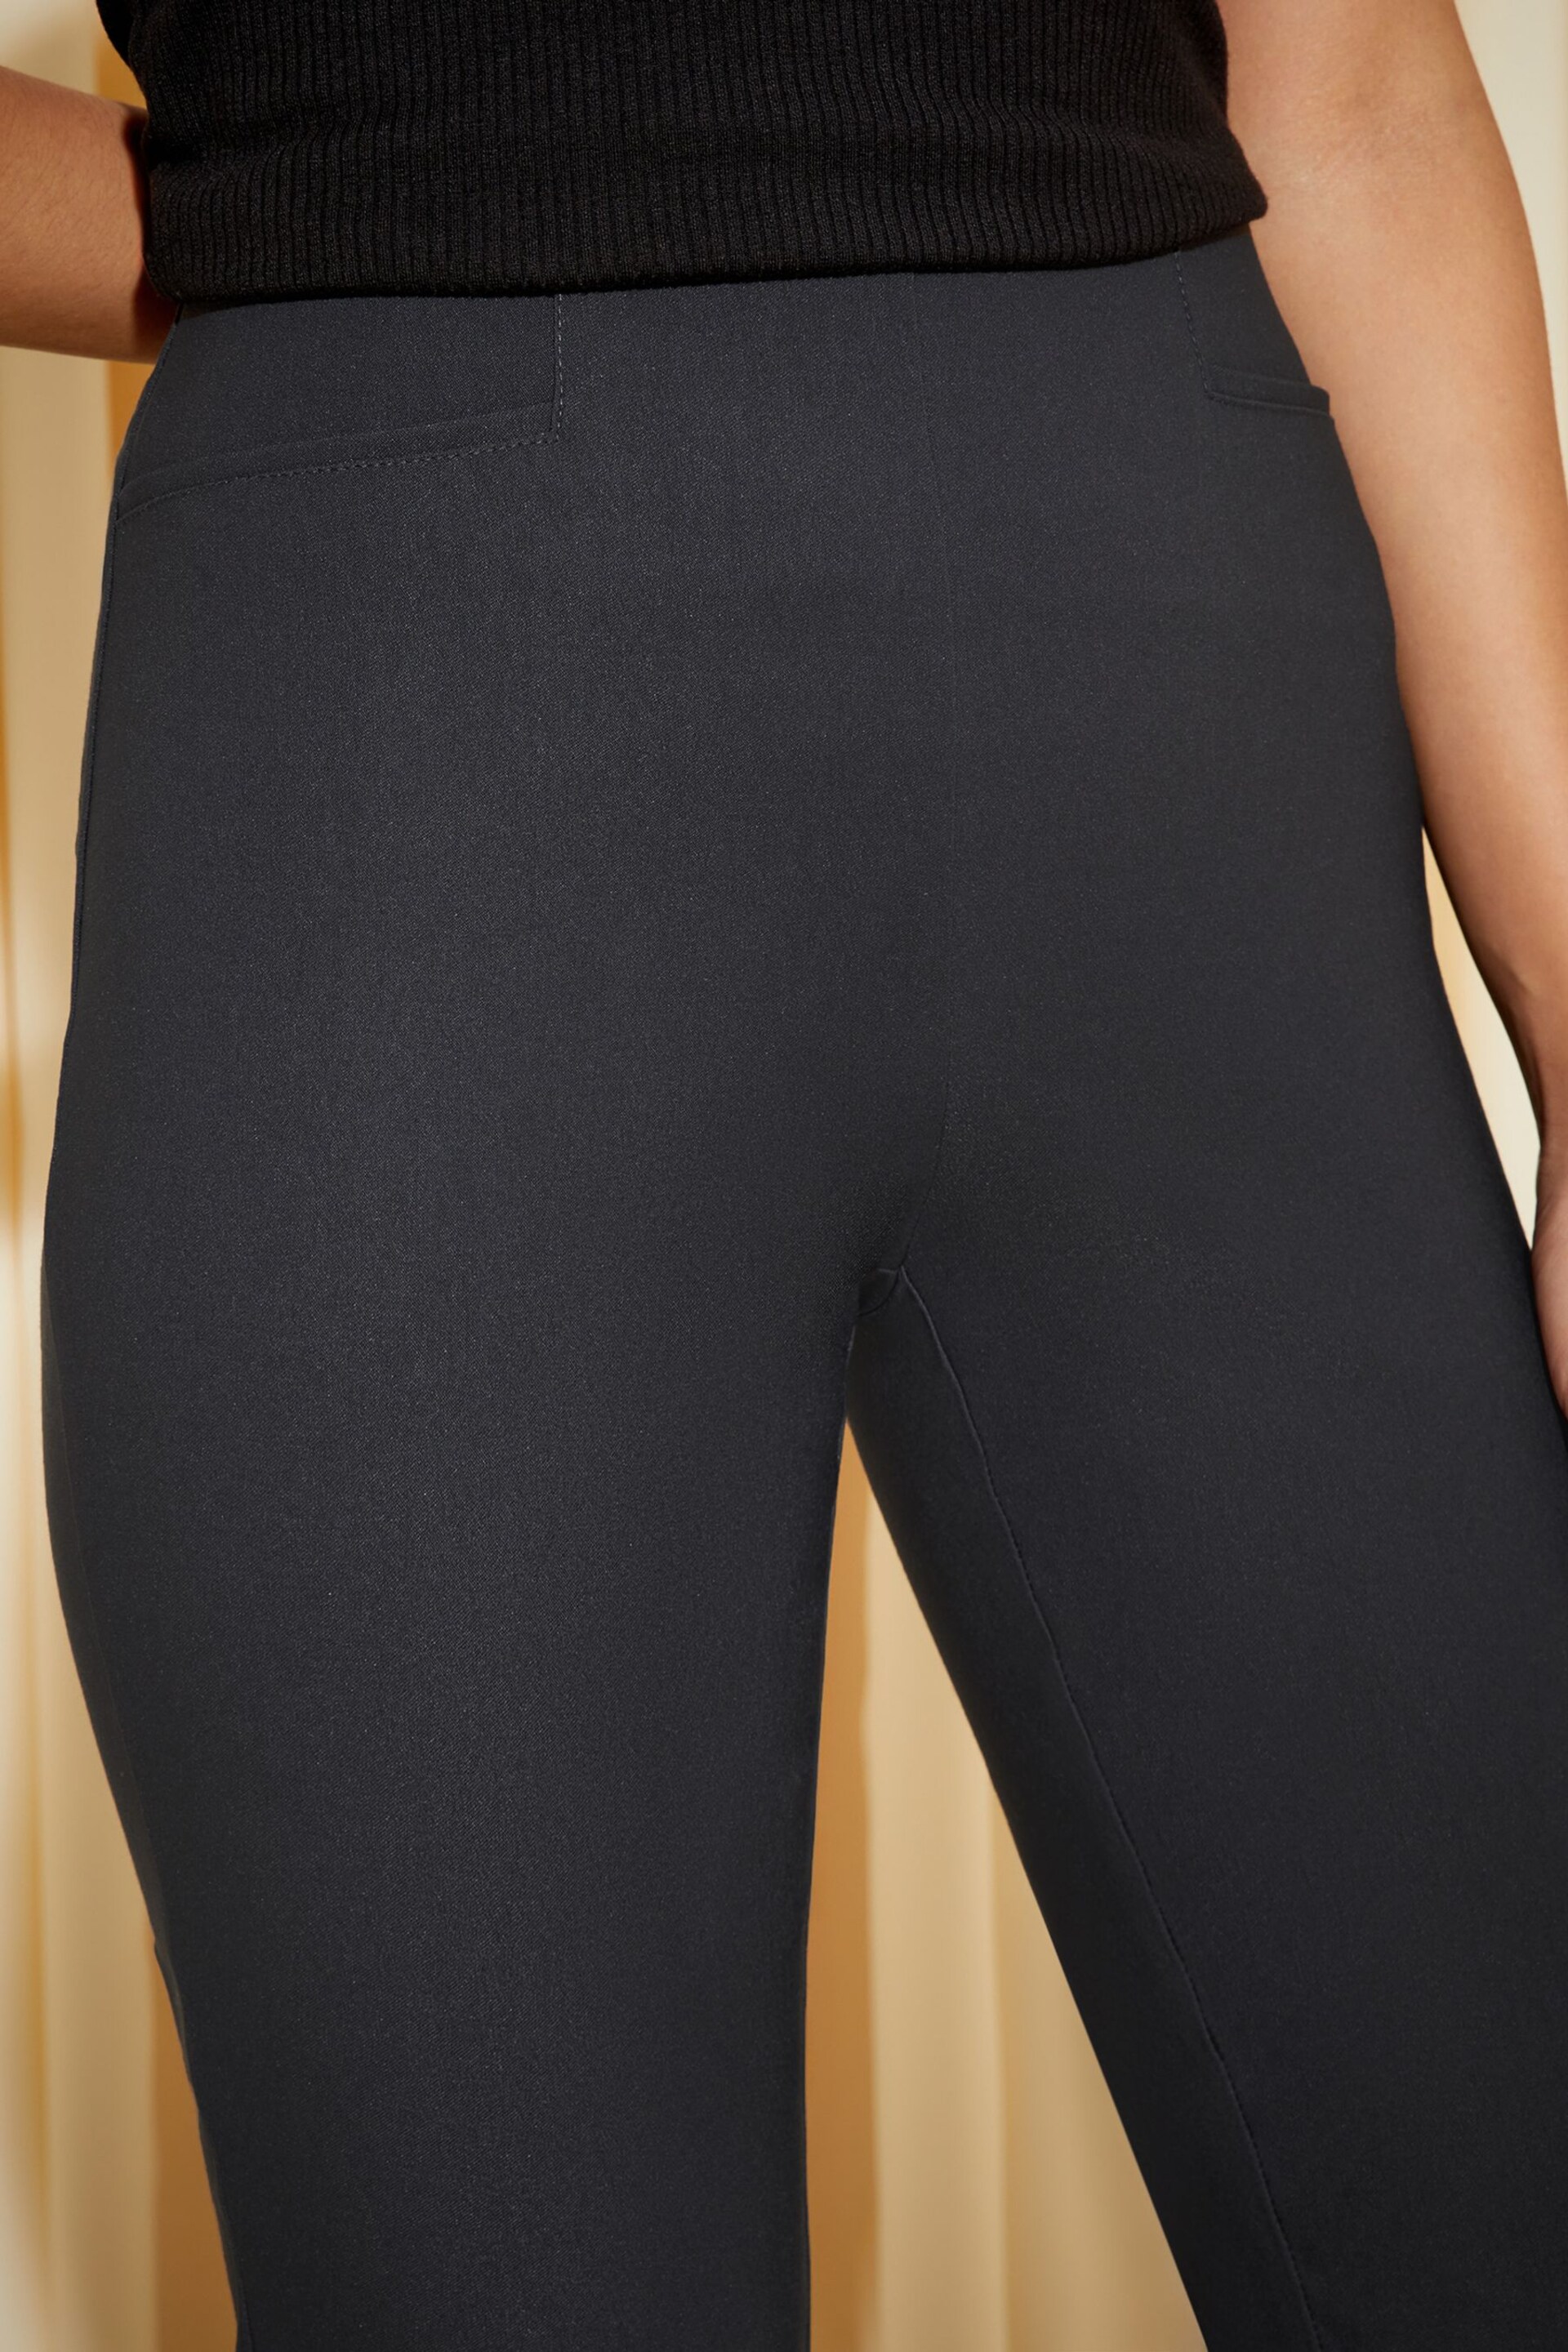 Friends Like These Charcoal Grey Petite Sculpting Stretch Trousers - Image 2 of 4